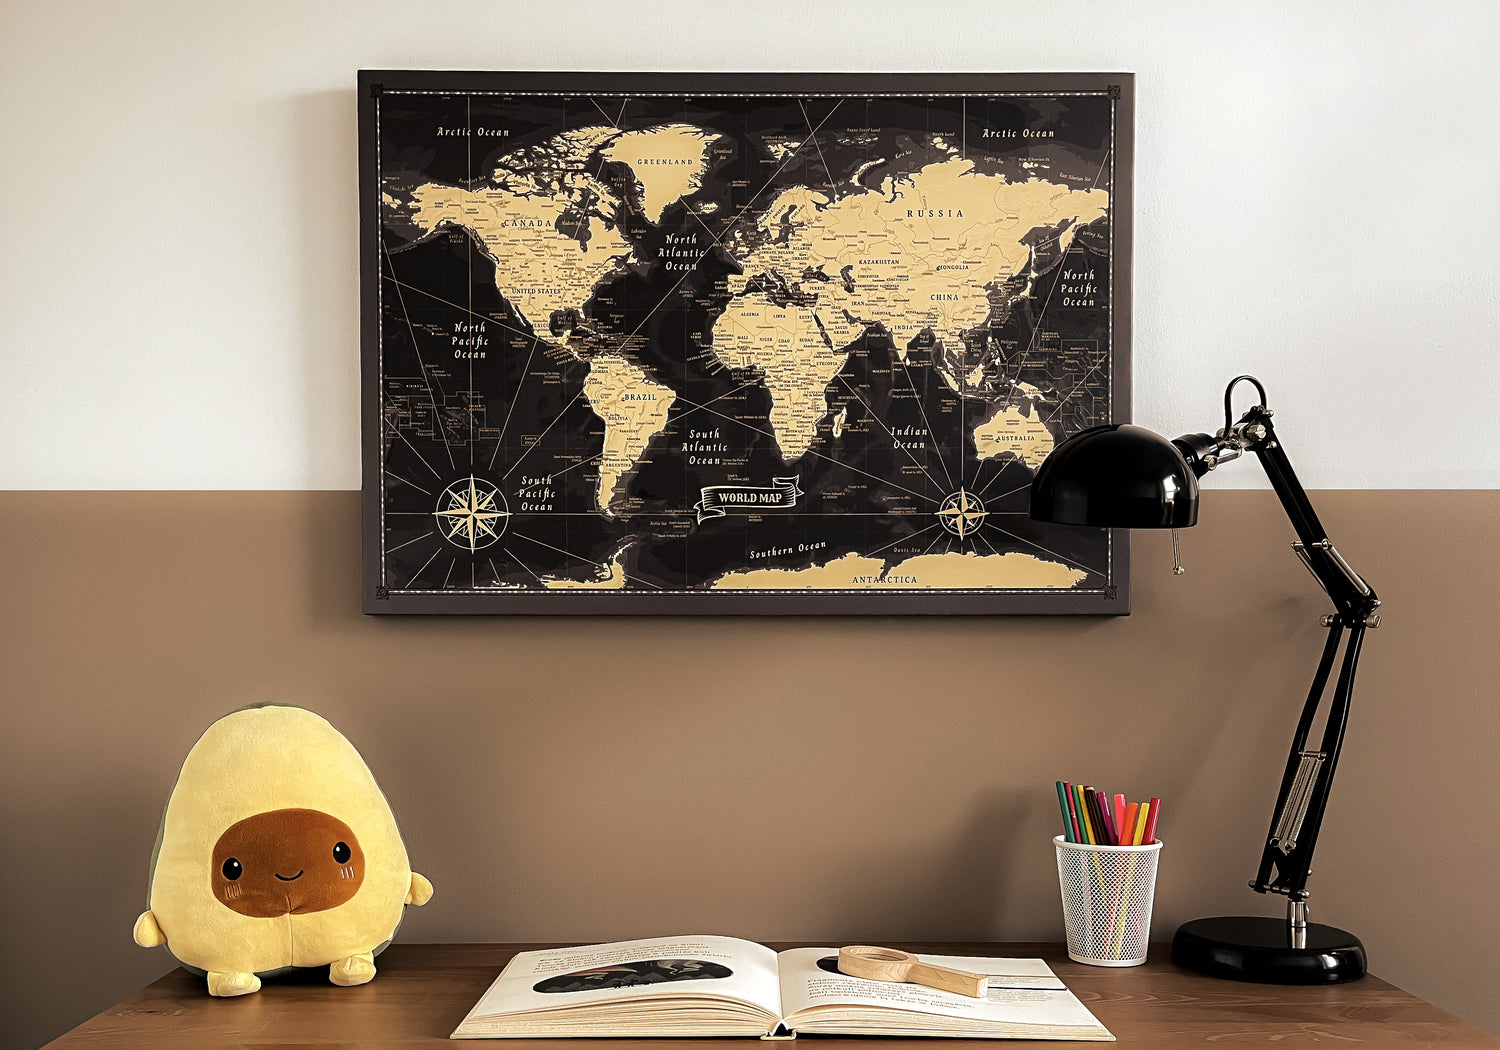 A well-organized study space with a vintage black and gold world map pinboard on the wall, accompanied by a plush toy avocado, a reading lamp, and colorful stationery, ideal for inspiring travel planning and educational exploration.